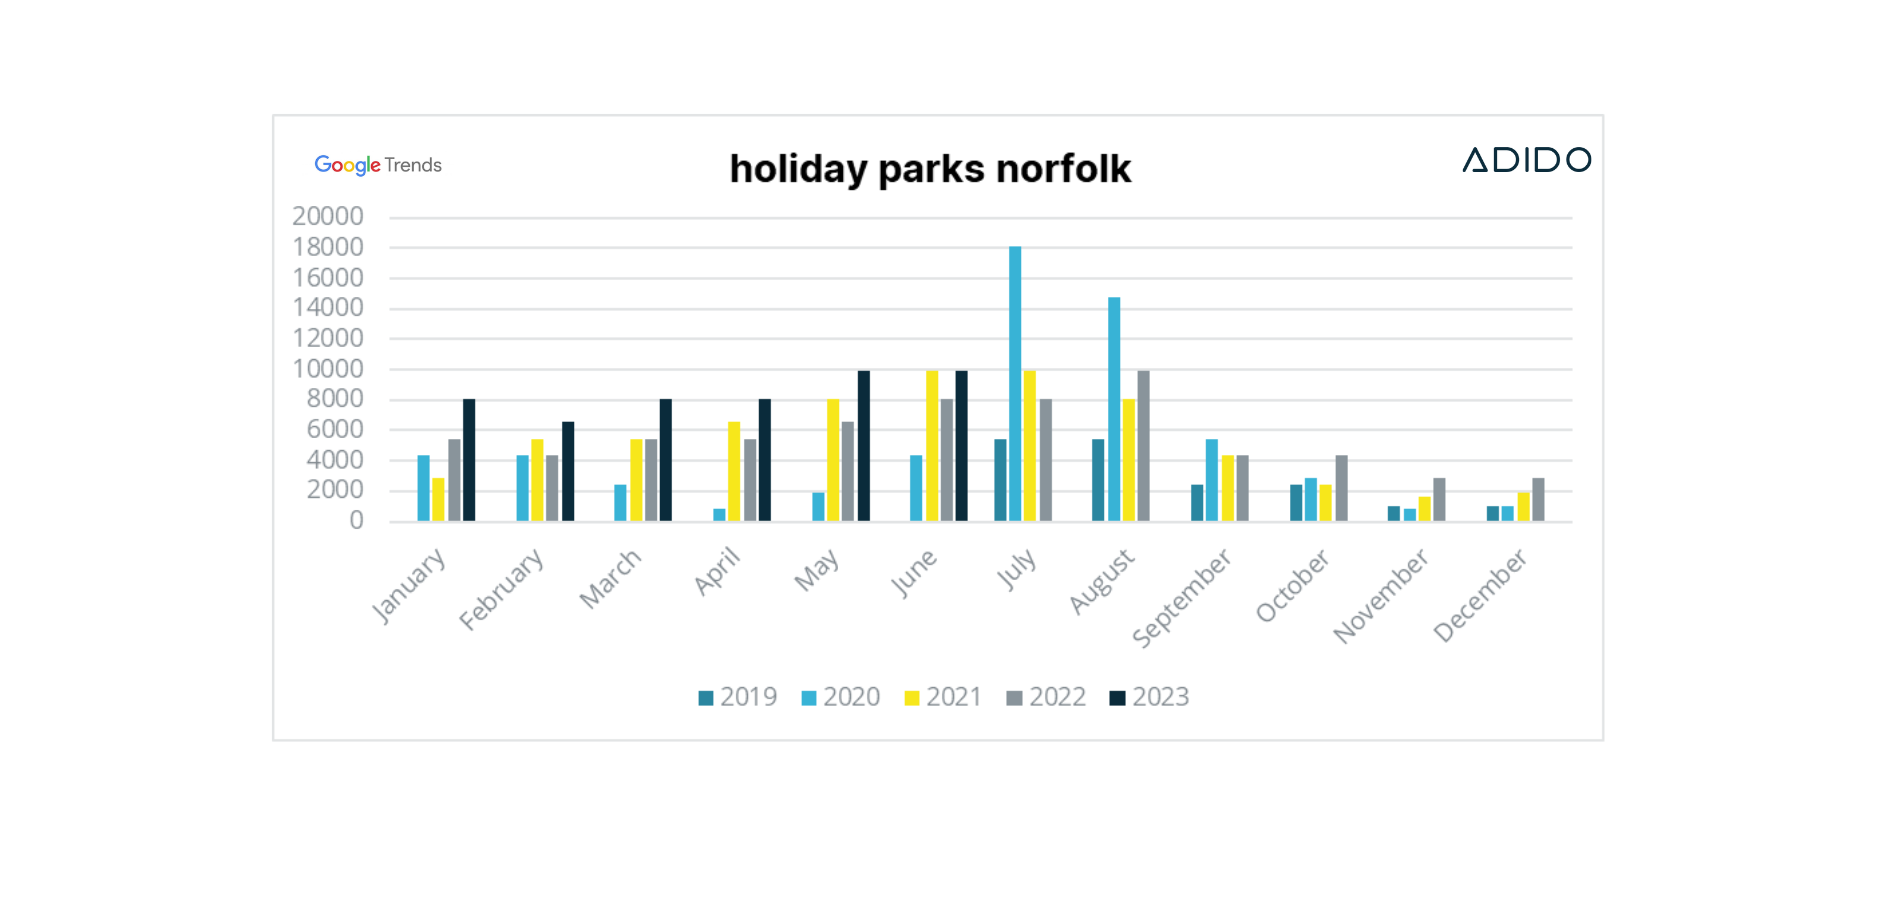 Holiday parks norfolk search trend 2019 2023